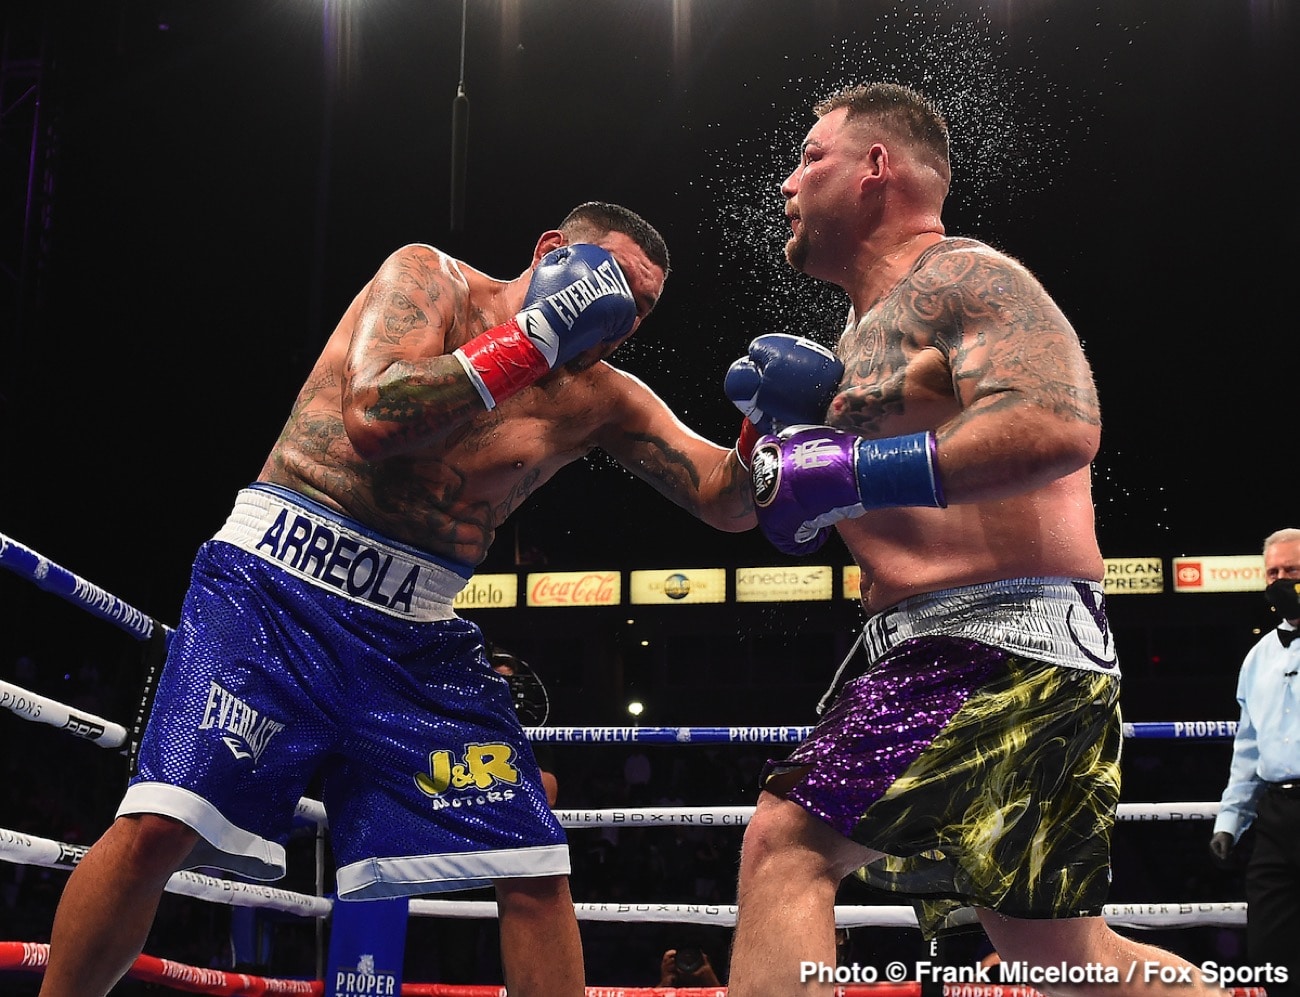 Andy Ruiz Jr., Deontay Wilder boxing photo and news image